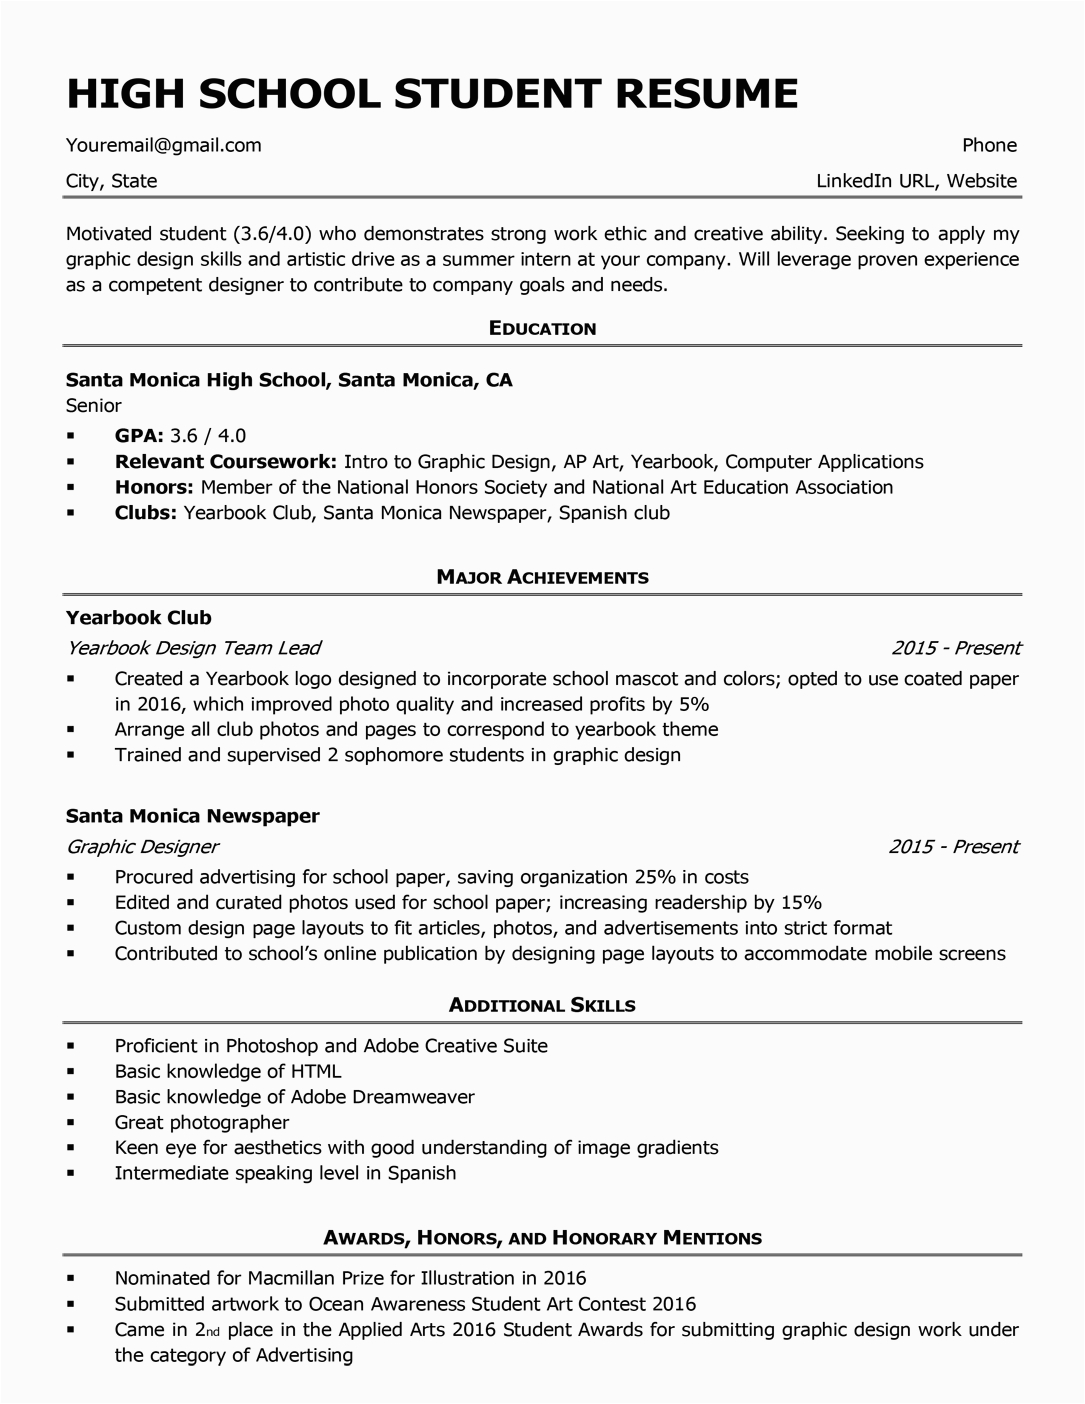 Samples Of A High School Student Resume High School Resume Template & Writing Tips